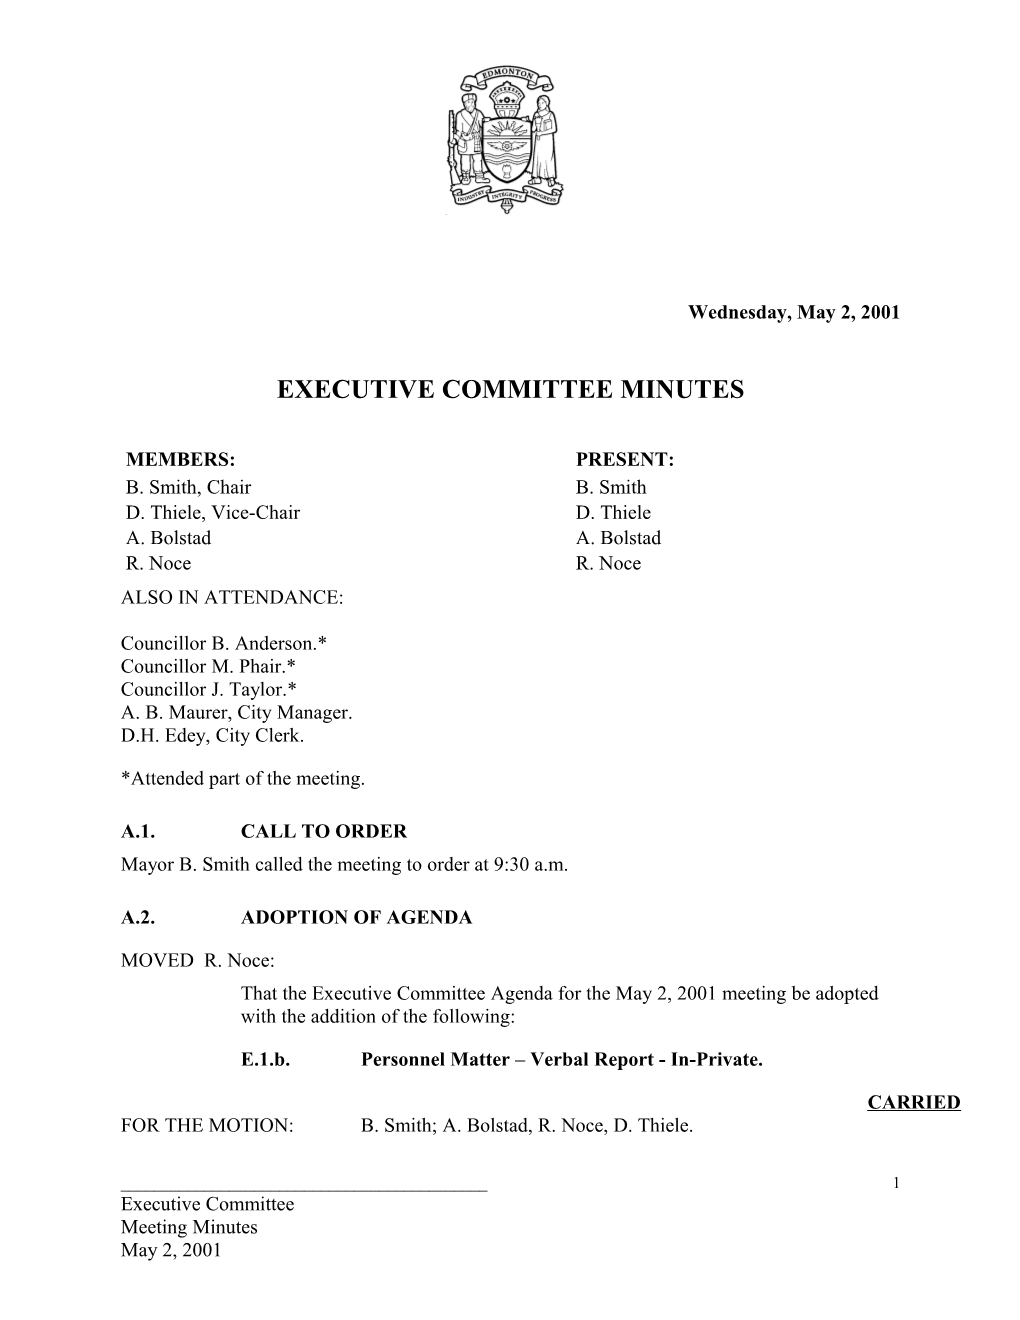 Minutes for Executive Committee May 2, 2001 Meeting